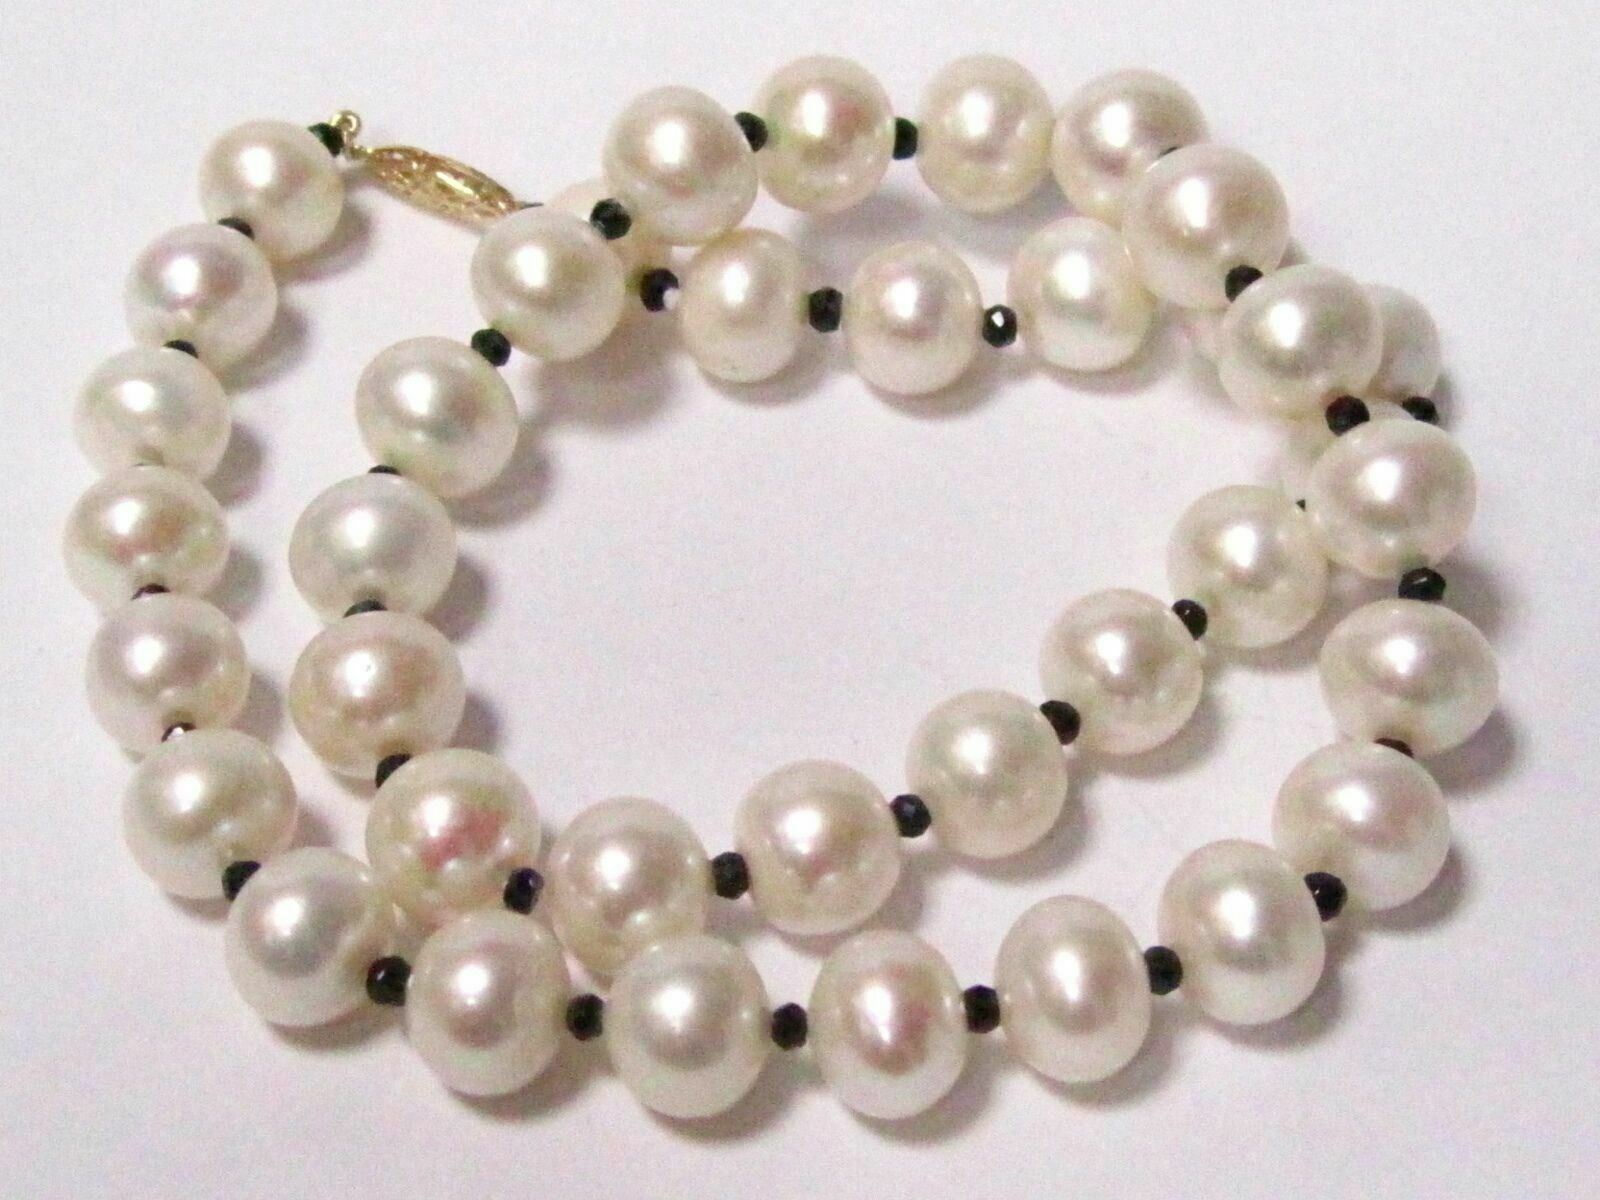 Fine 12mm White Pearl String Necklace with Spinel Gems 20 Inches 14k Yellow Gold